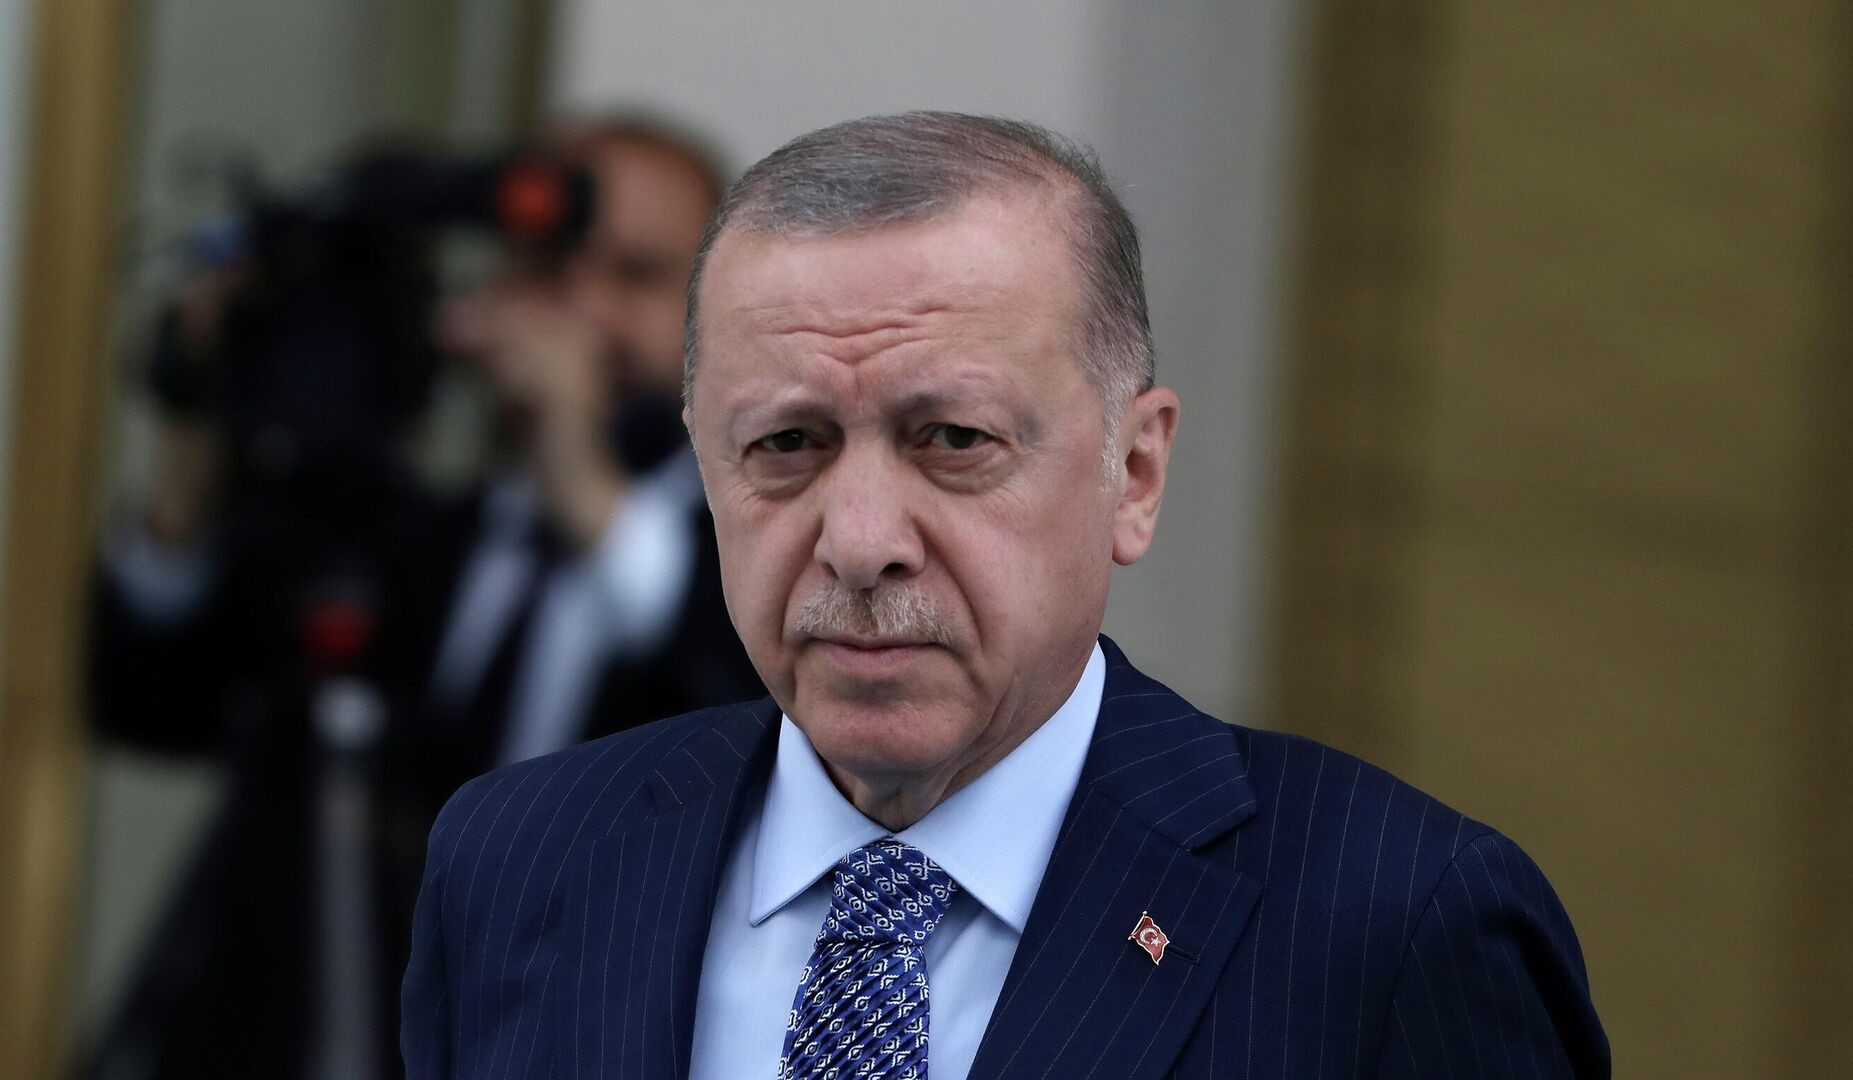 Erdogan advised Greece to learn lessons from the history of relations with Turkey